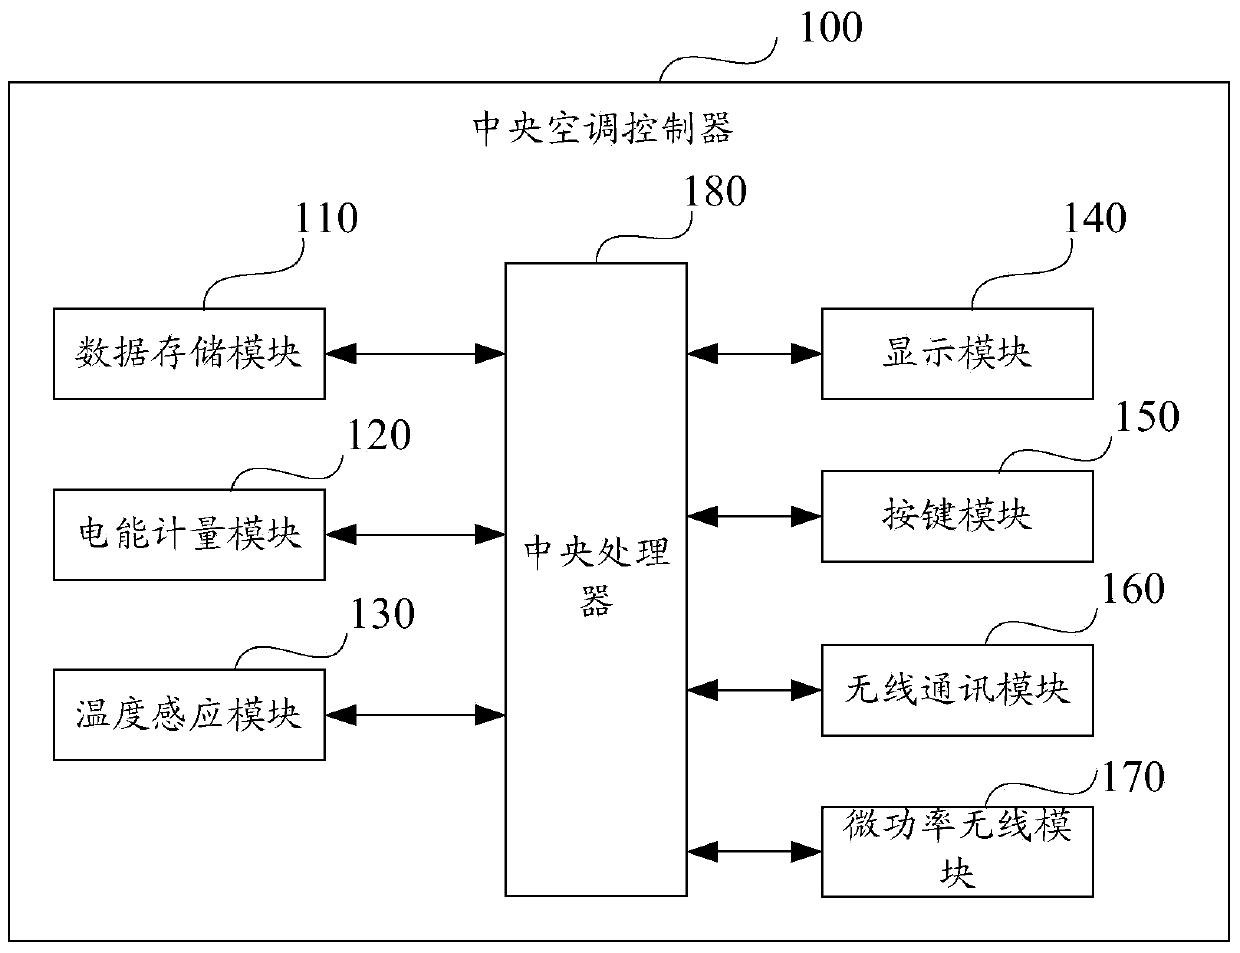 Central air conditioner controller, as well as prepaid and multi-mode control system and method for central air conditioner